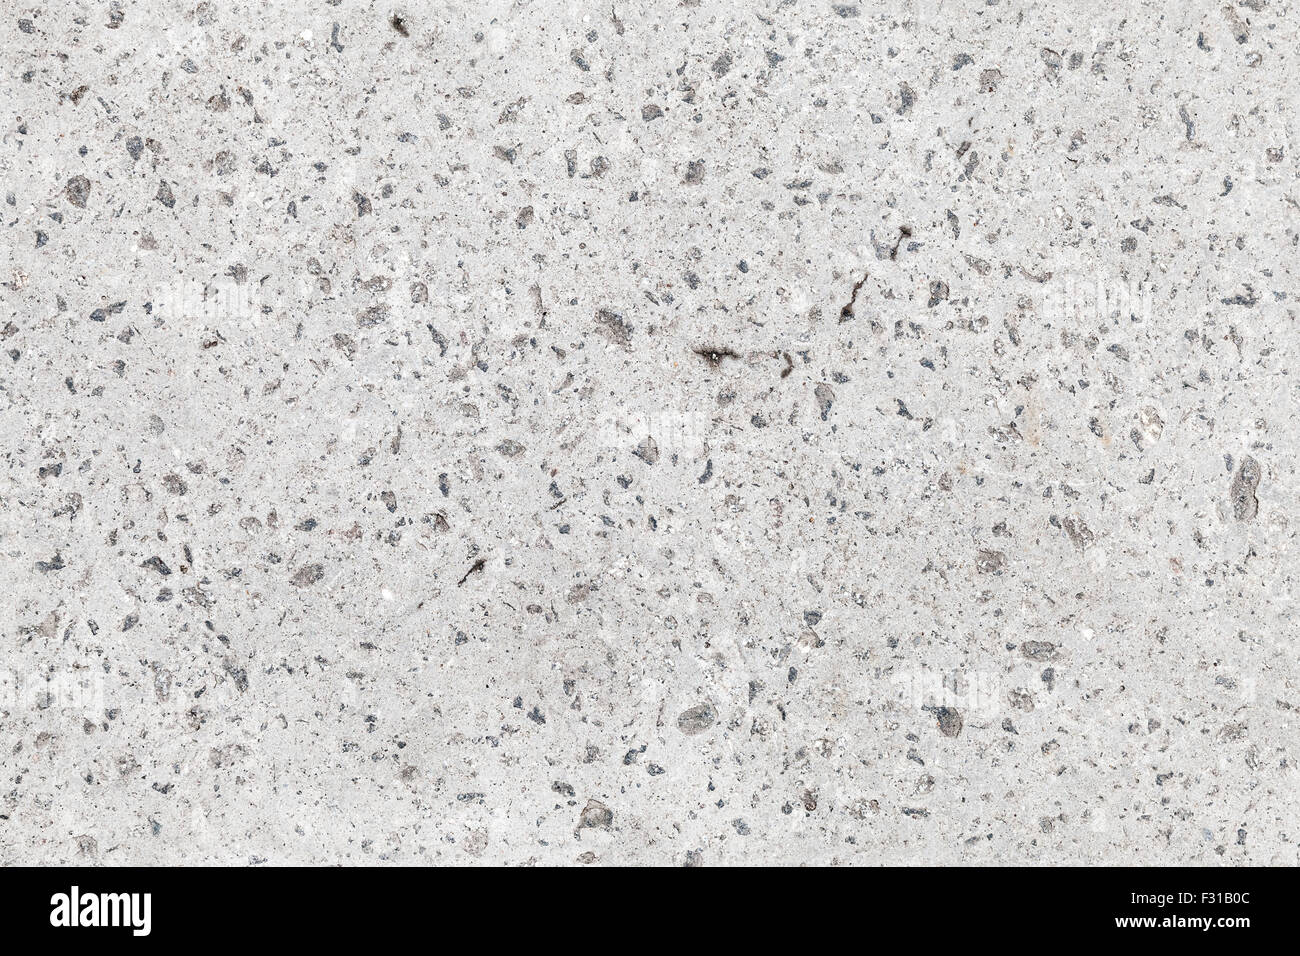 Seamless background texture of gray concrete wall with gravel Stock Photo